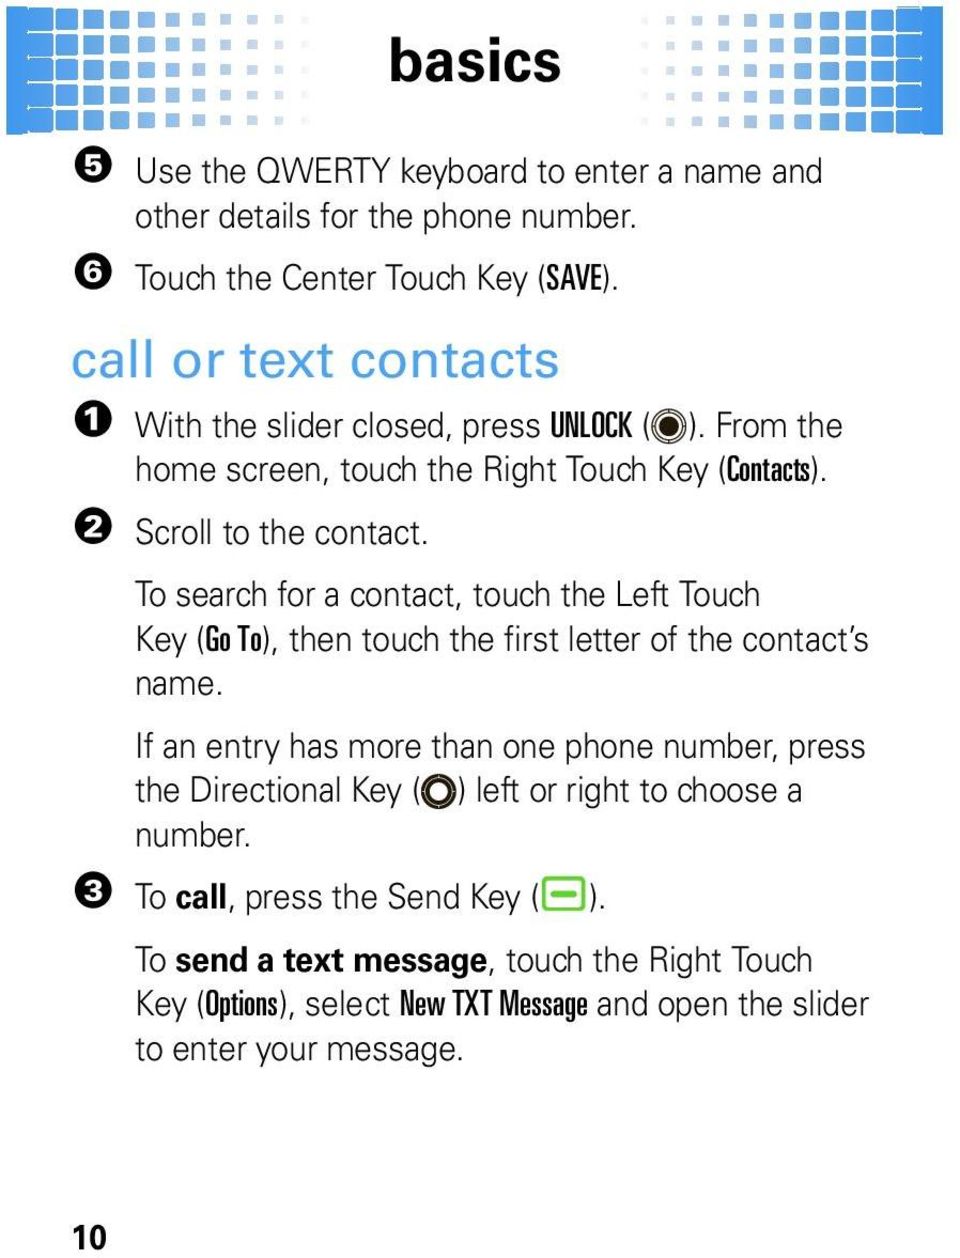 To search for a contact, touch the Left Touch Key (Go To), then touch the first letter of the contact s name.